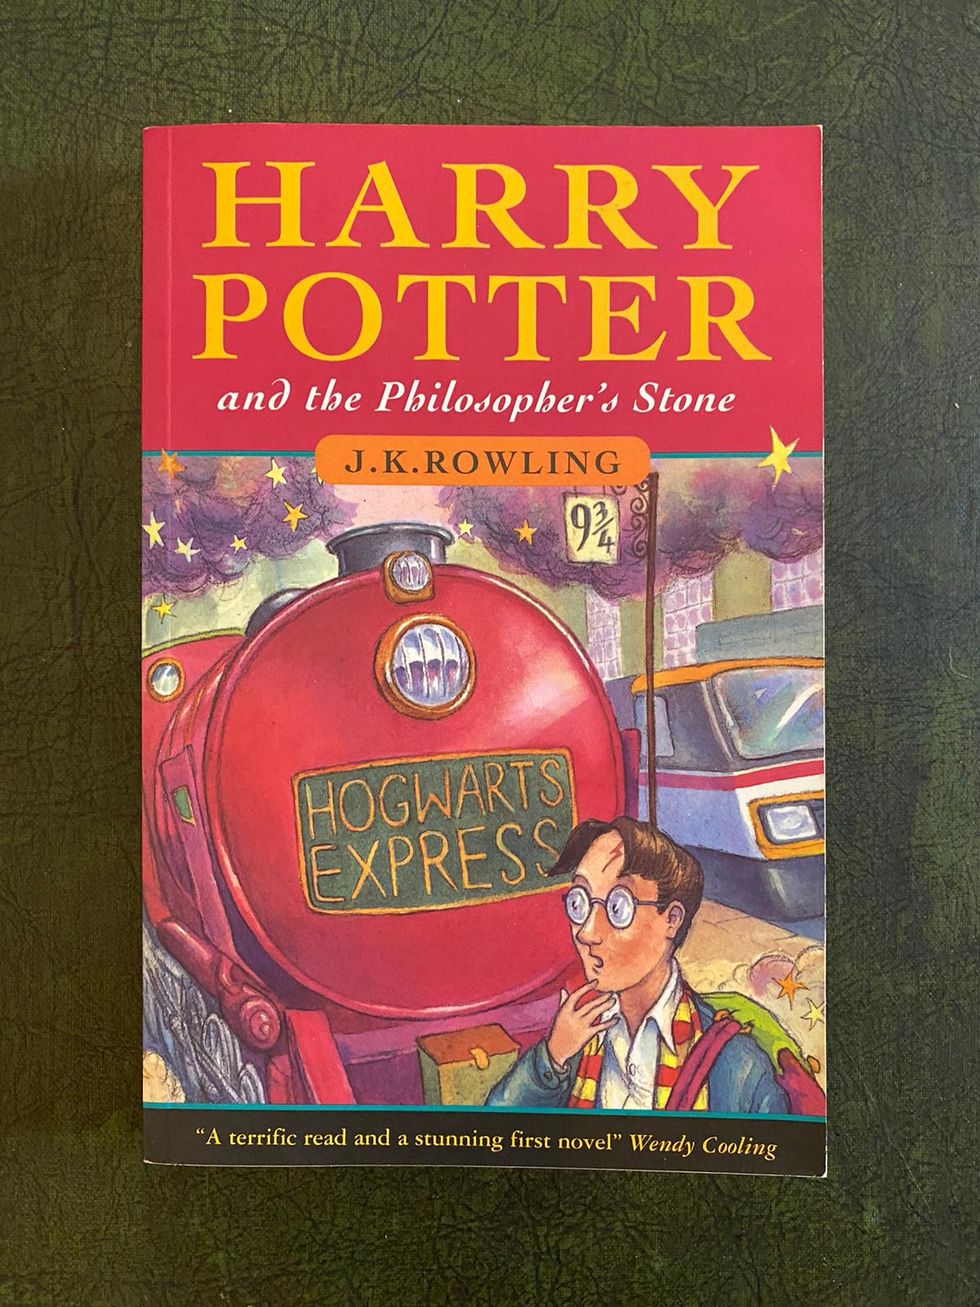 Harry Potter book donated to charity shop could fetch up to £10,000 at auction